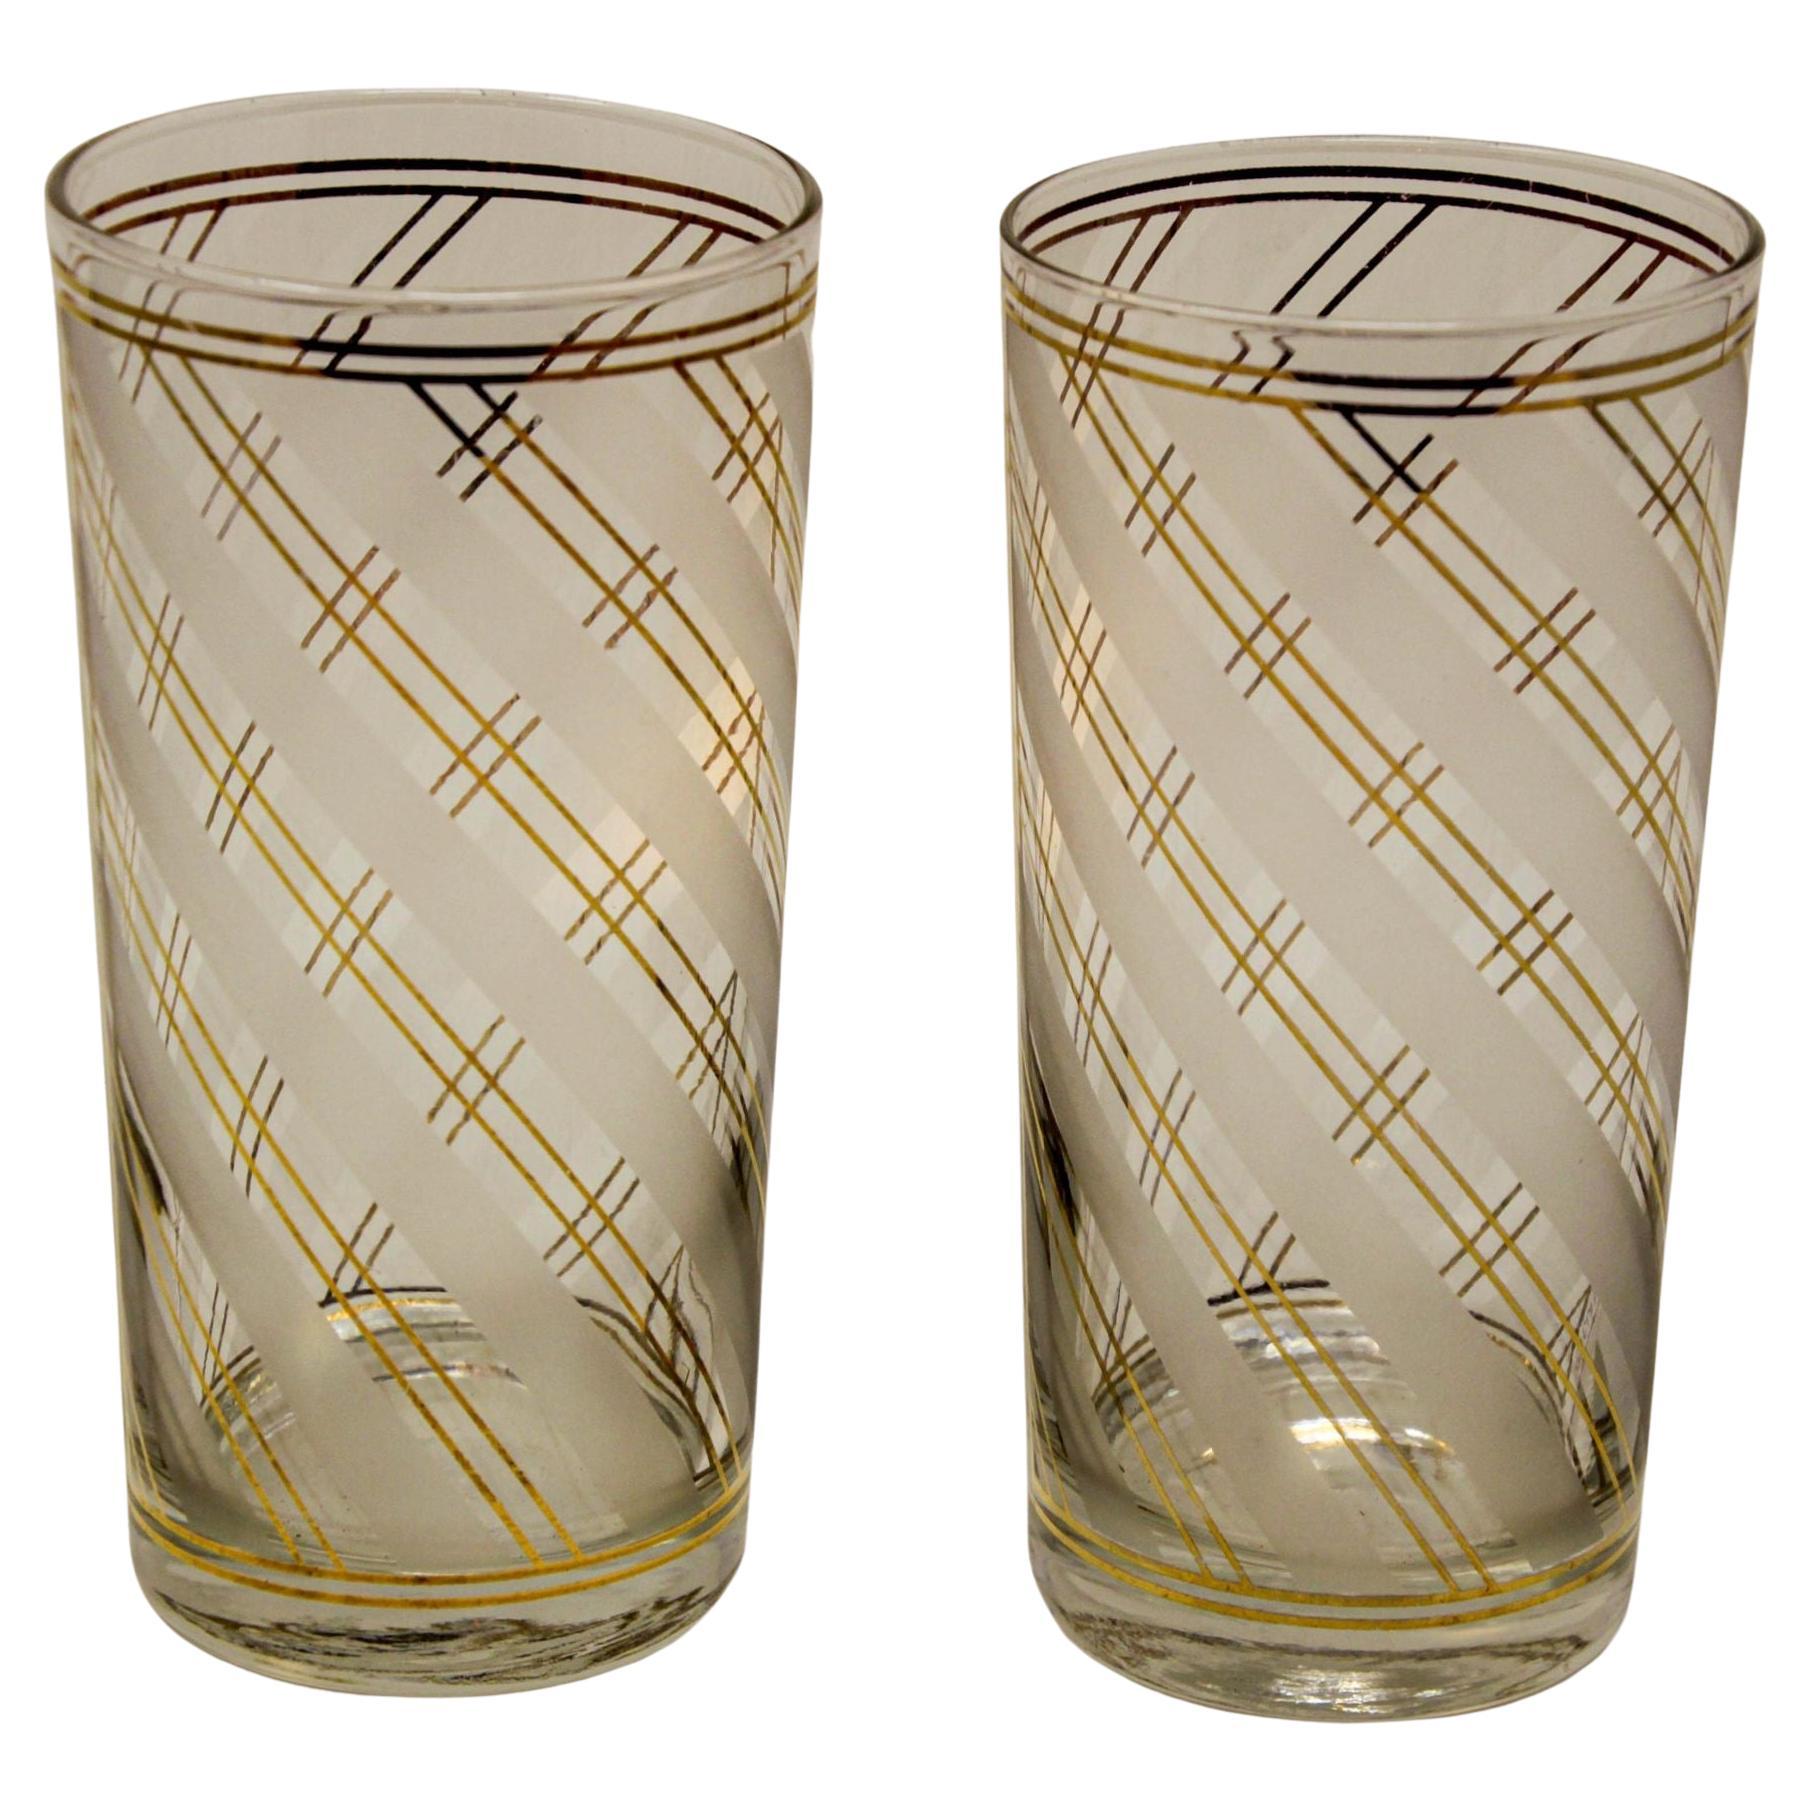 Vintage Art Deco Culver Gold Striped Set of 2 High Ball Tumblers